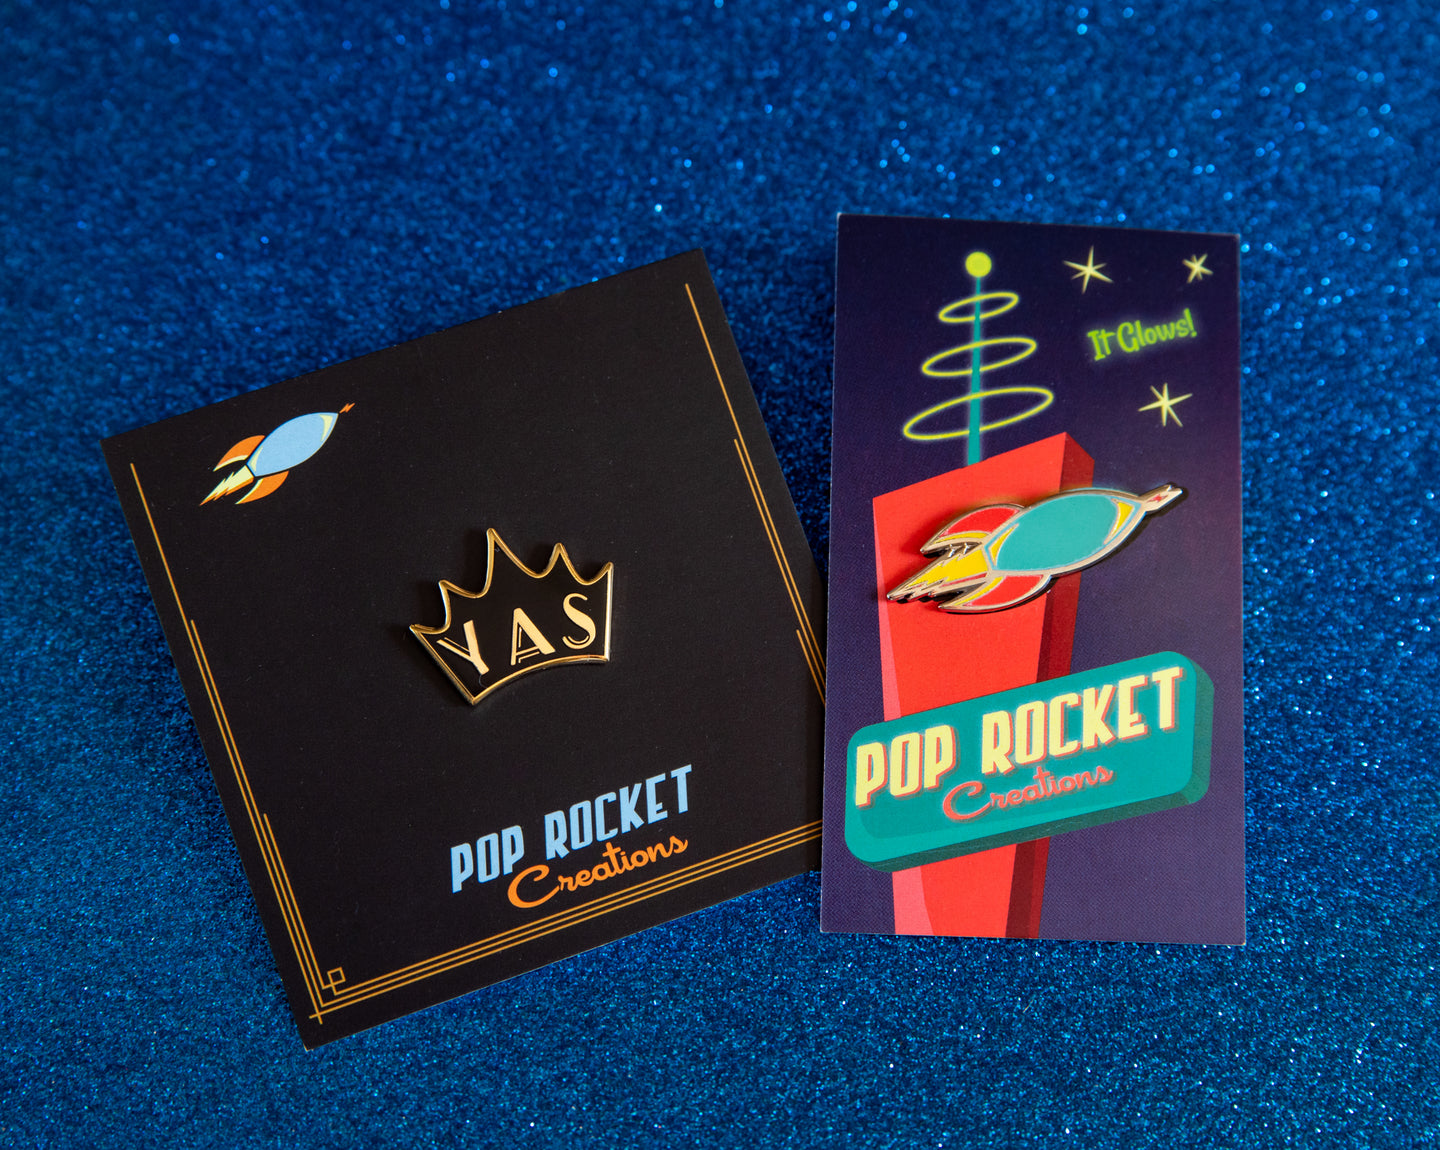 Seconds Sale - Pop Rocket pin or Yas pin